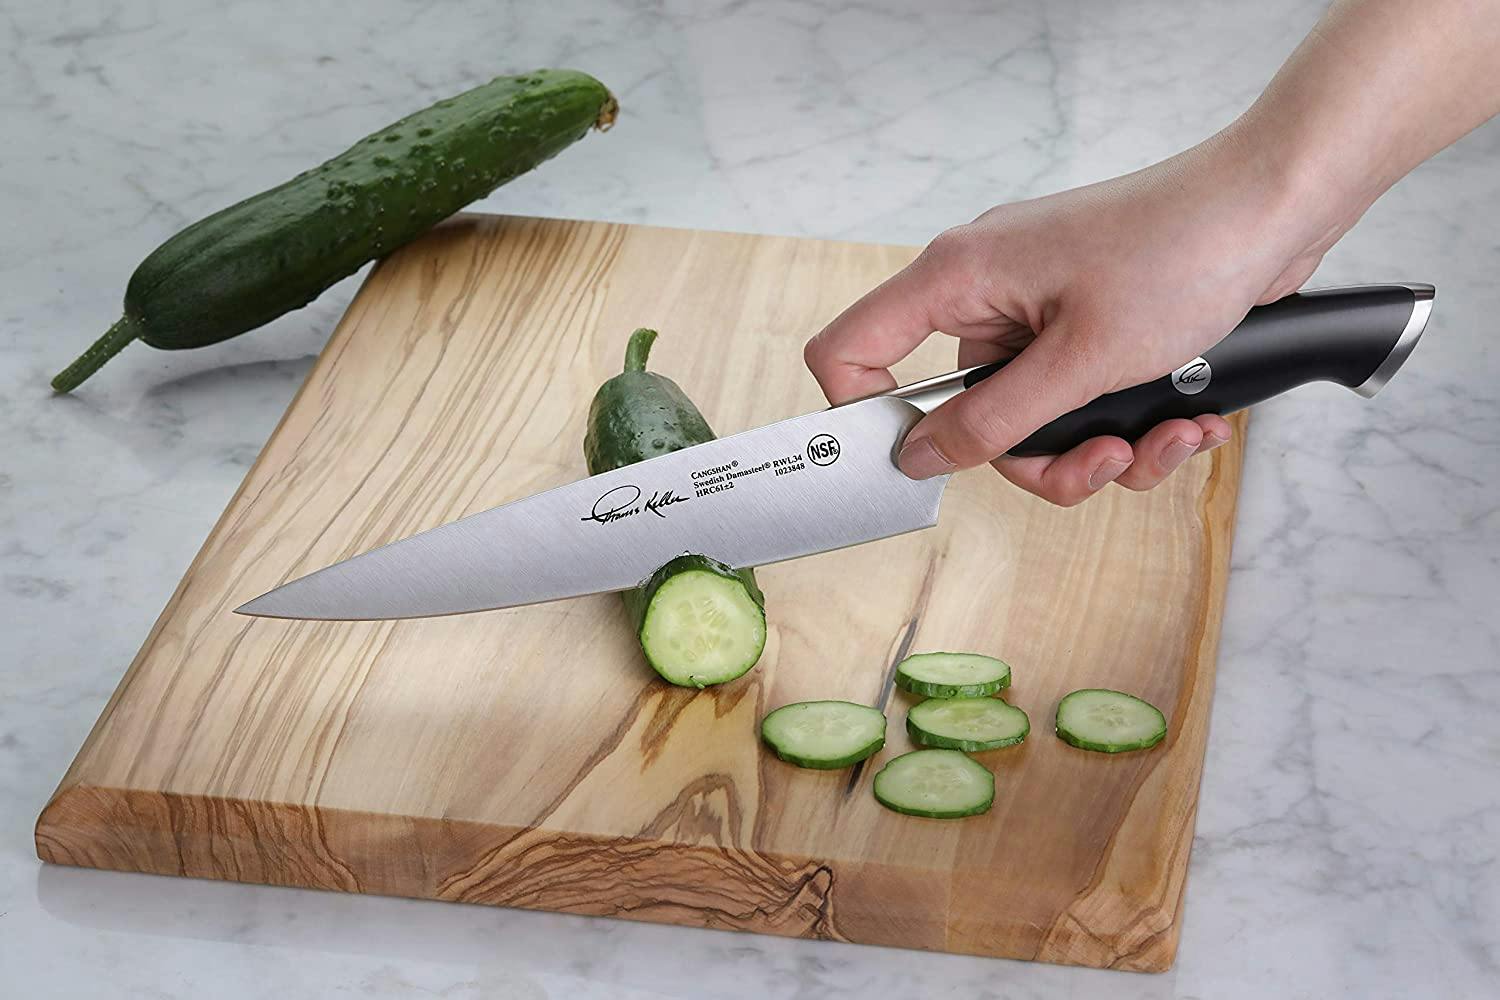 Cangshan Thomas Keller Signature Collection Utility Knife, 7"